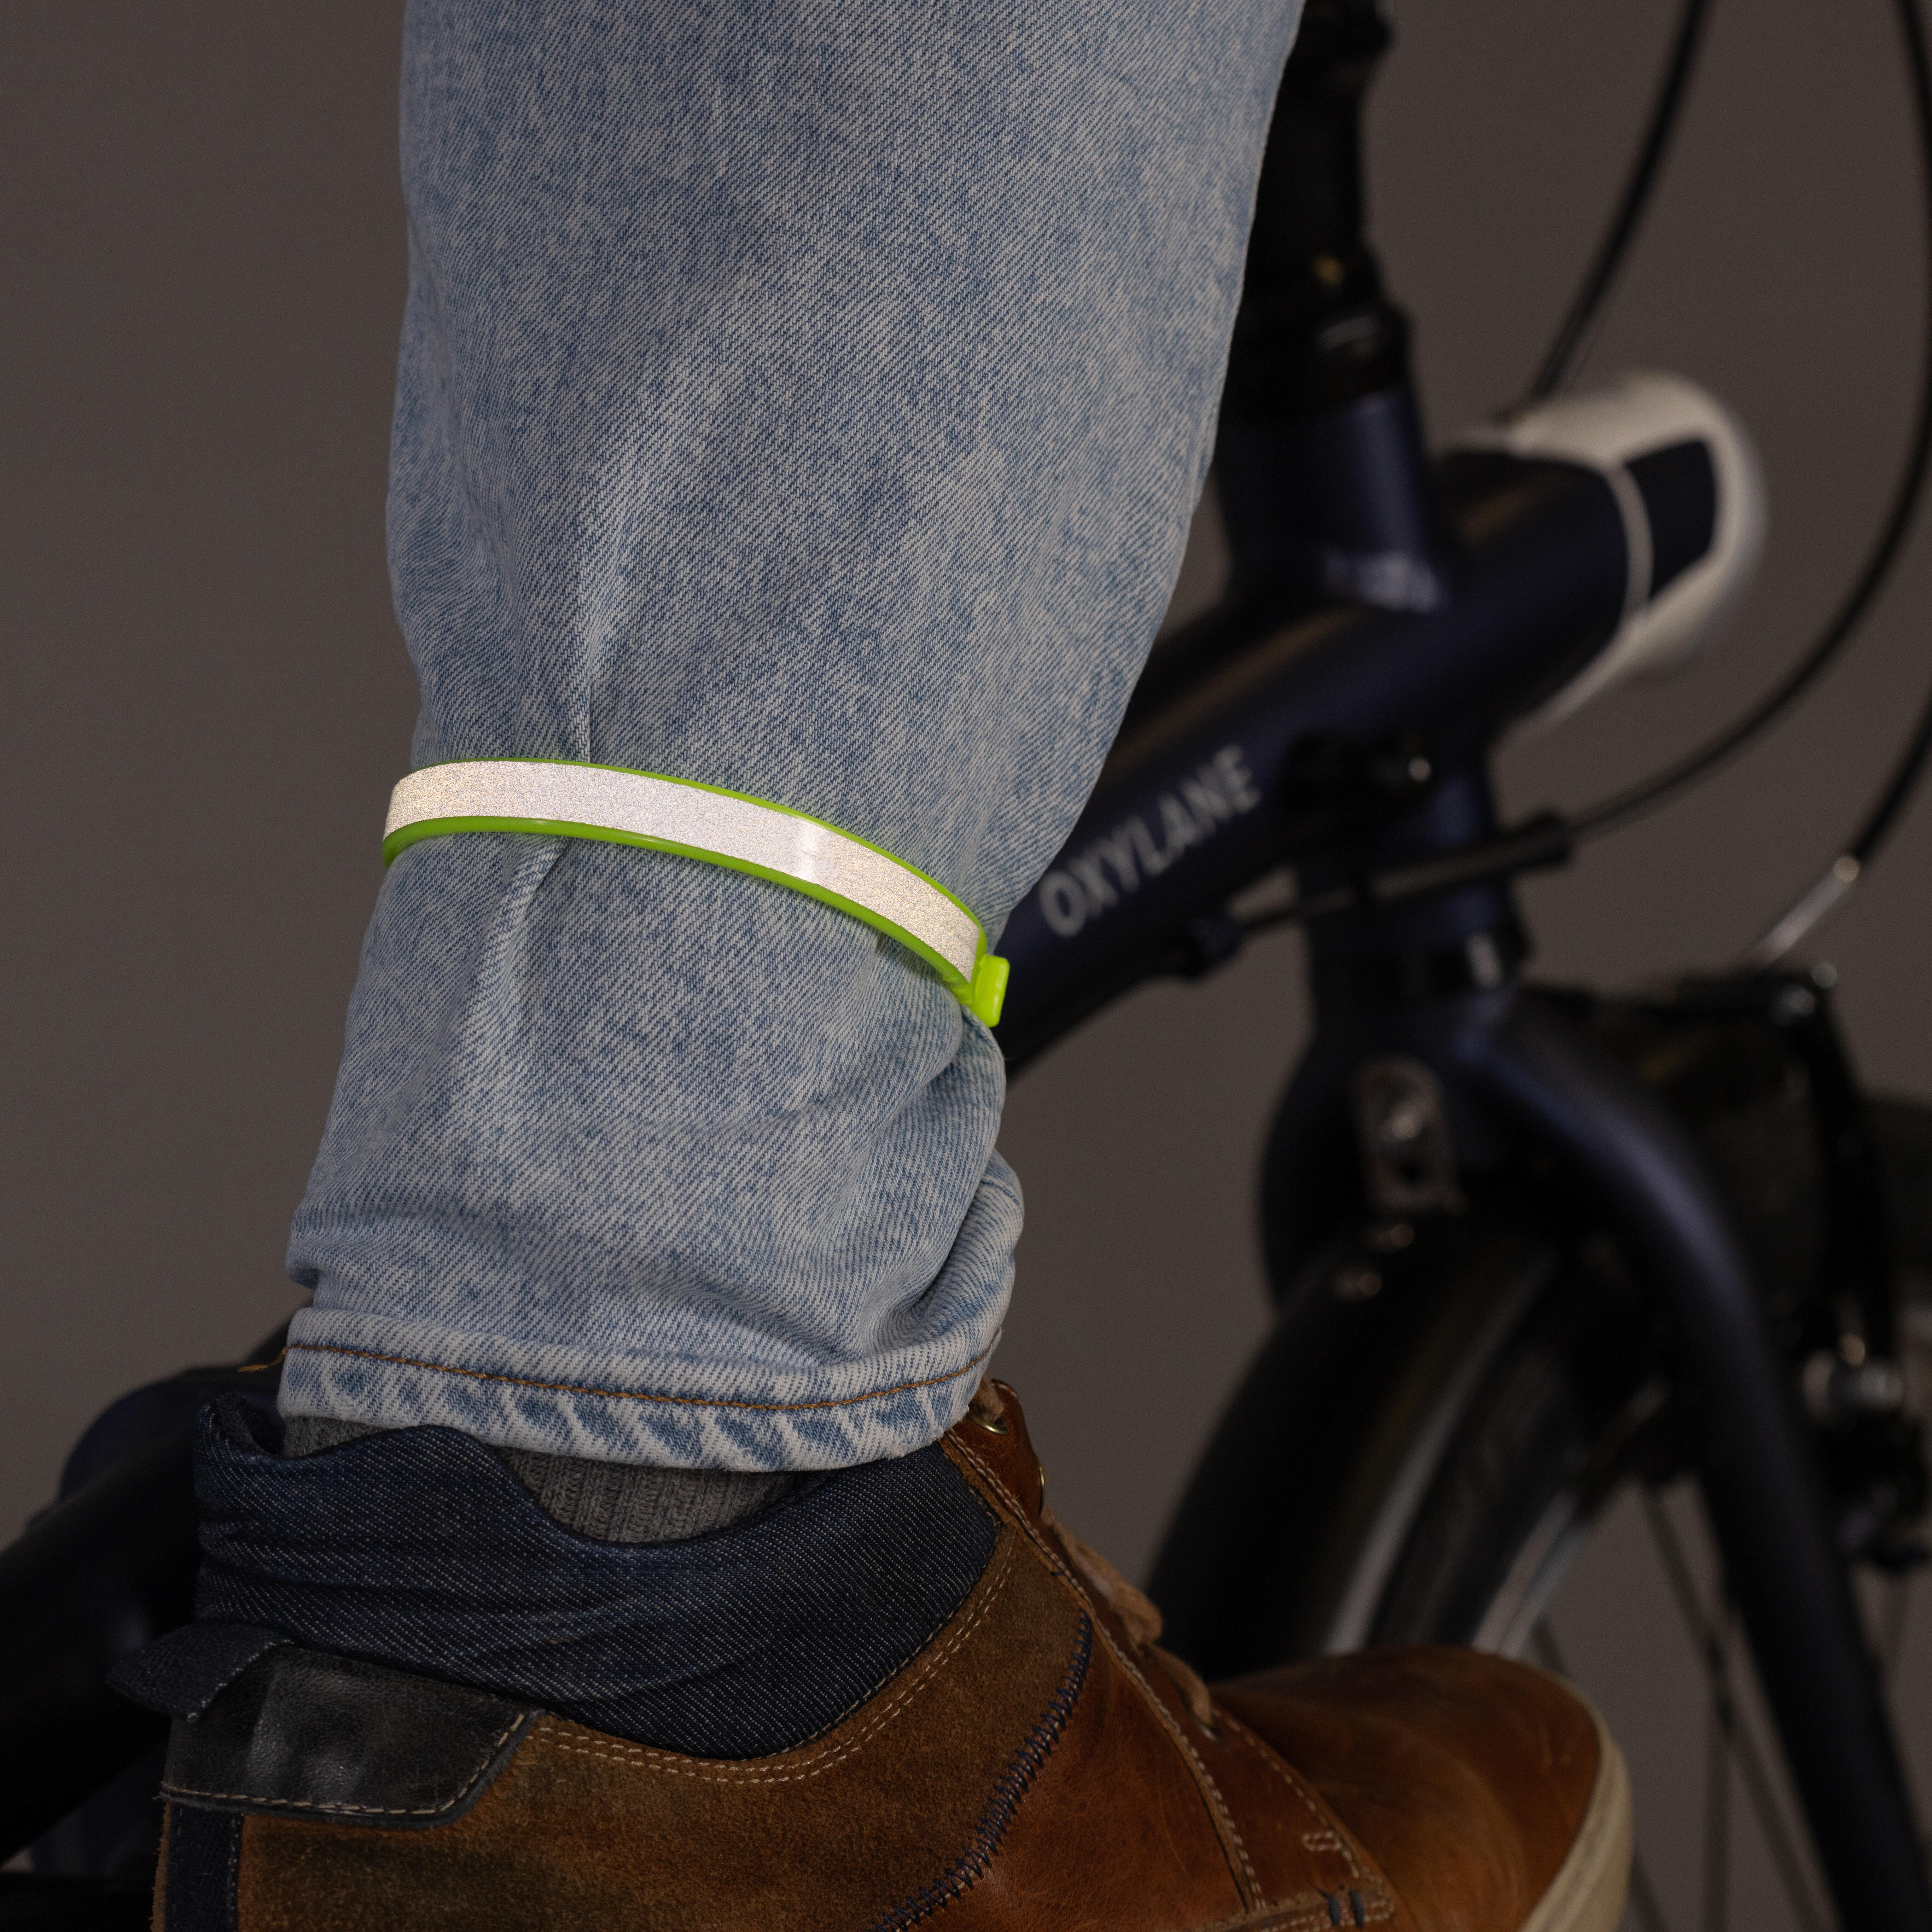 Trouser straps for commuter cyclists - tweedy brown